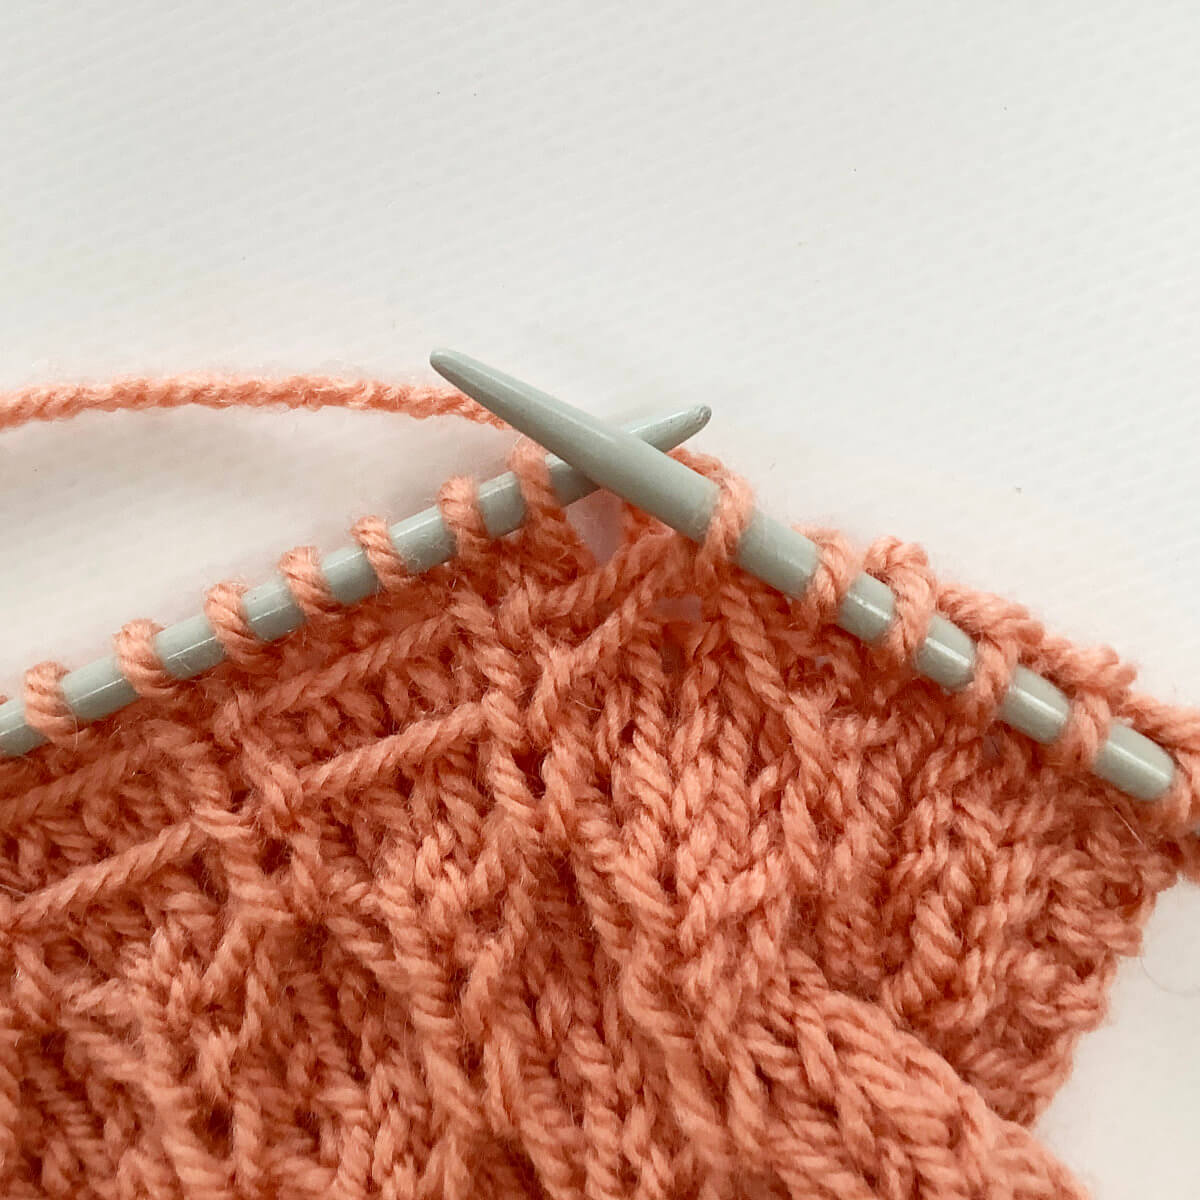 The end result: a k1 uls stitch